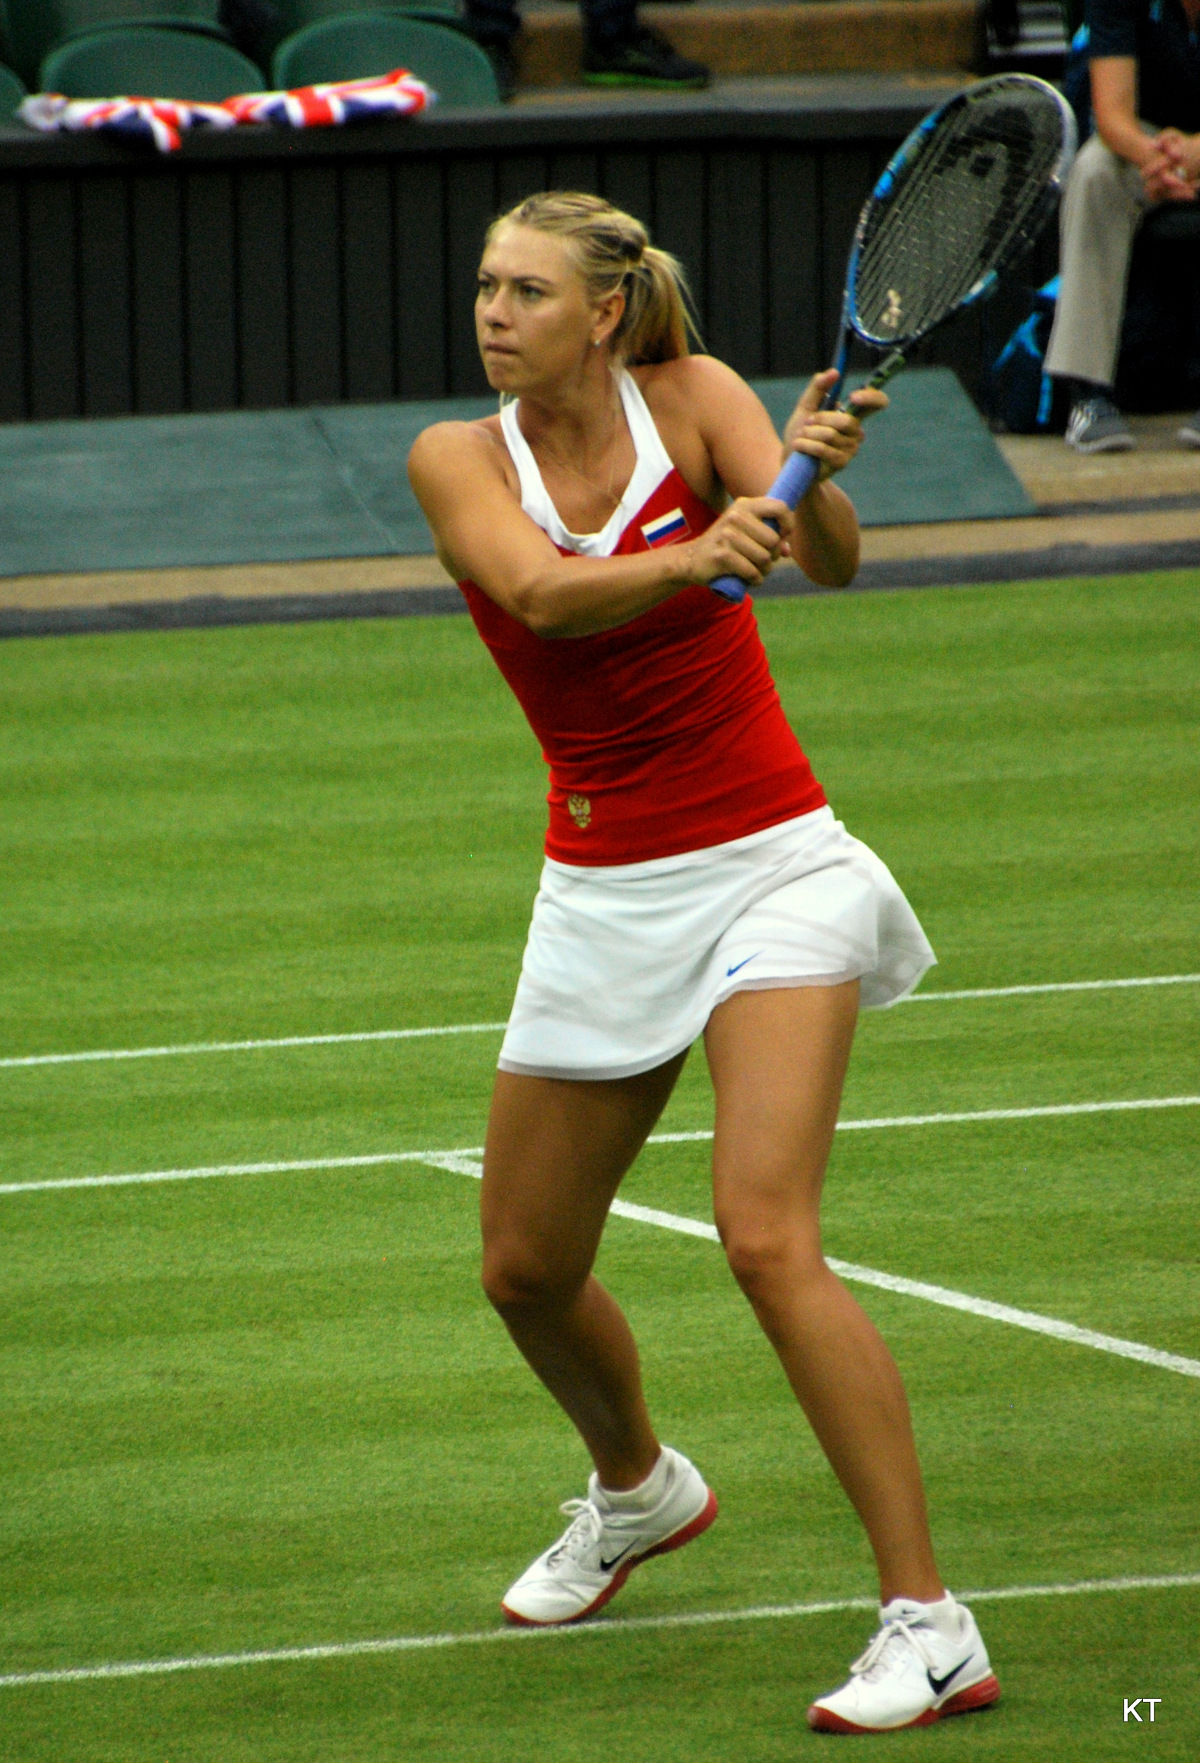 On the picture is Maria Sharapova